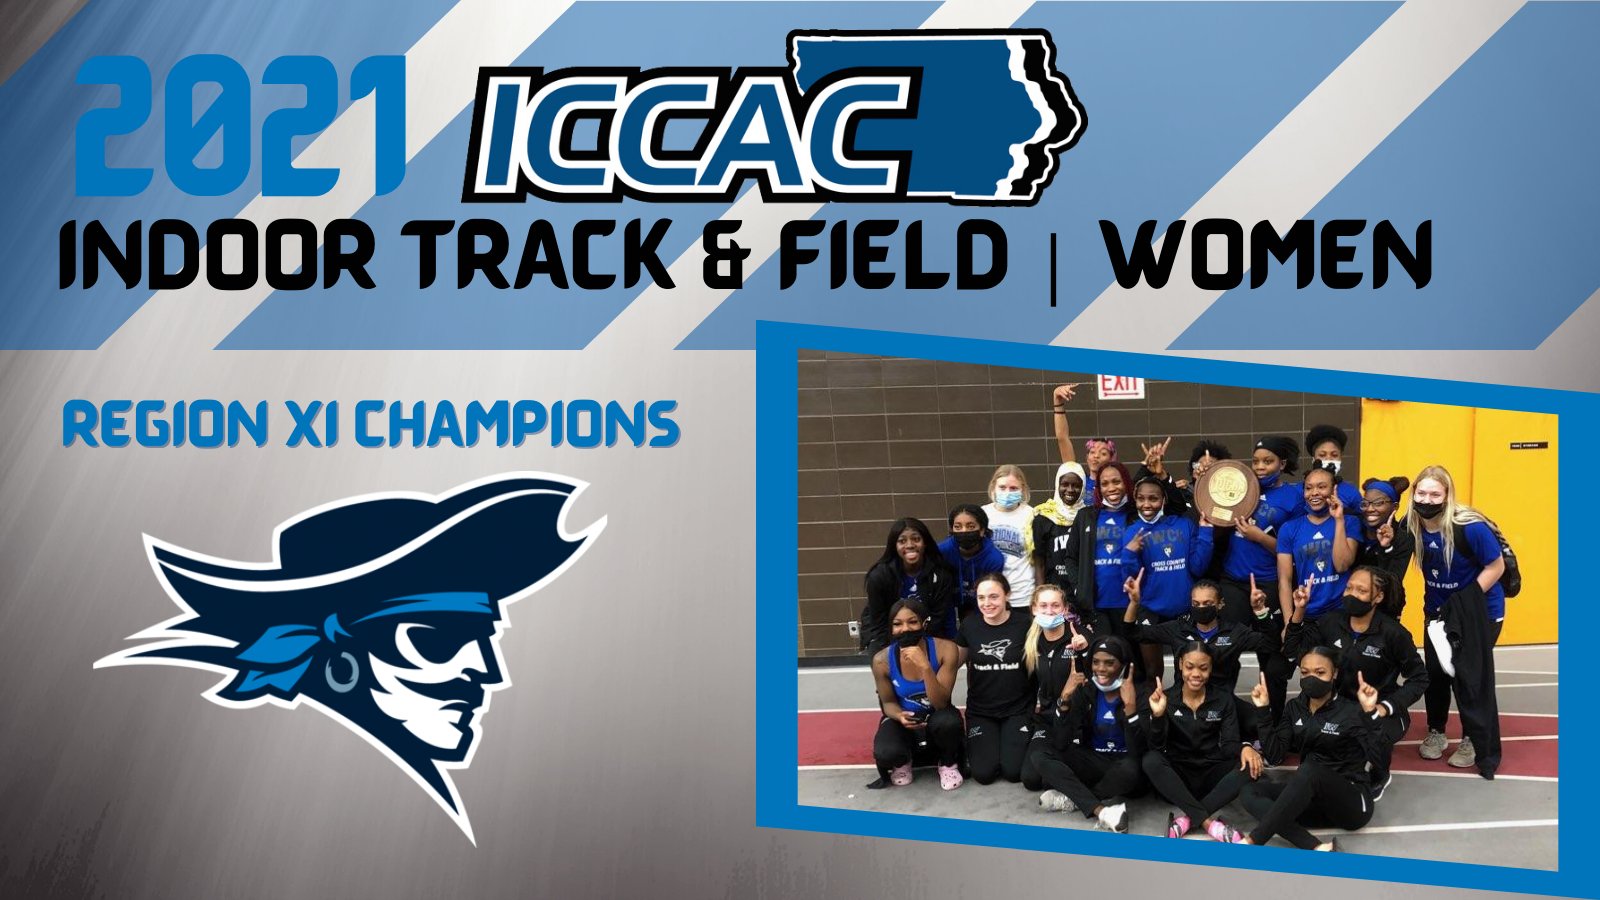 Women's Track & Field Wins First ICCAC Indoor Championship!